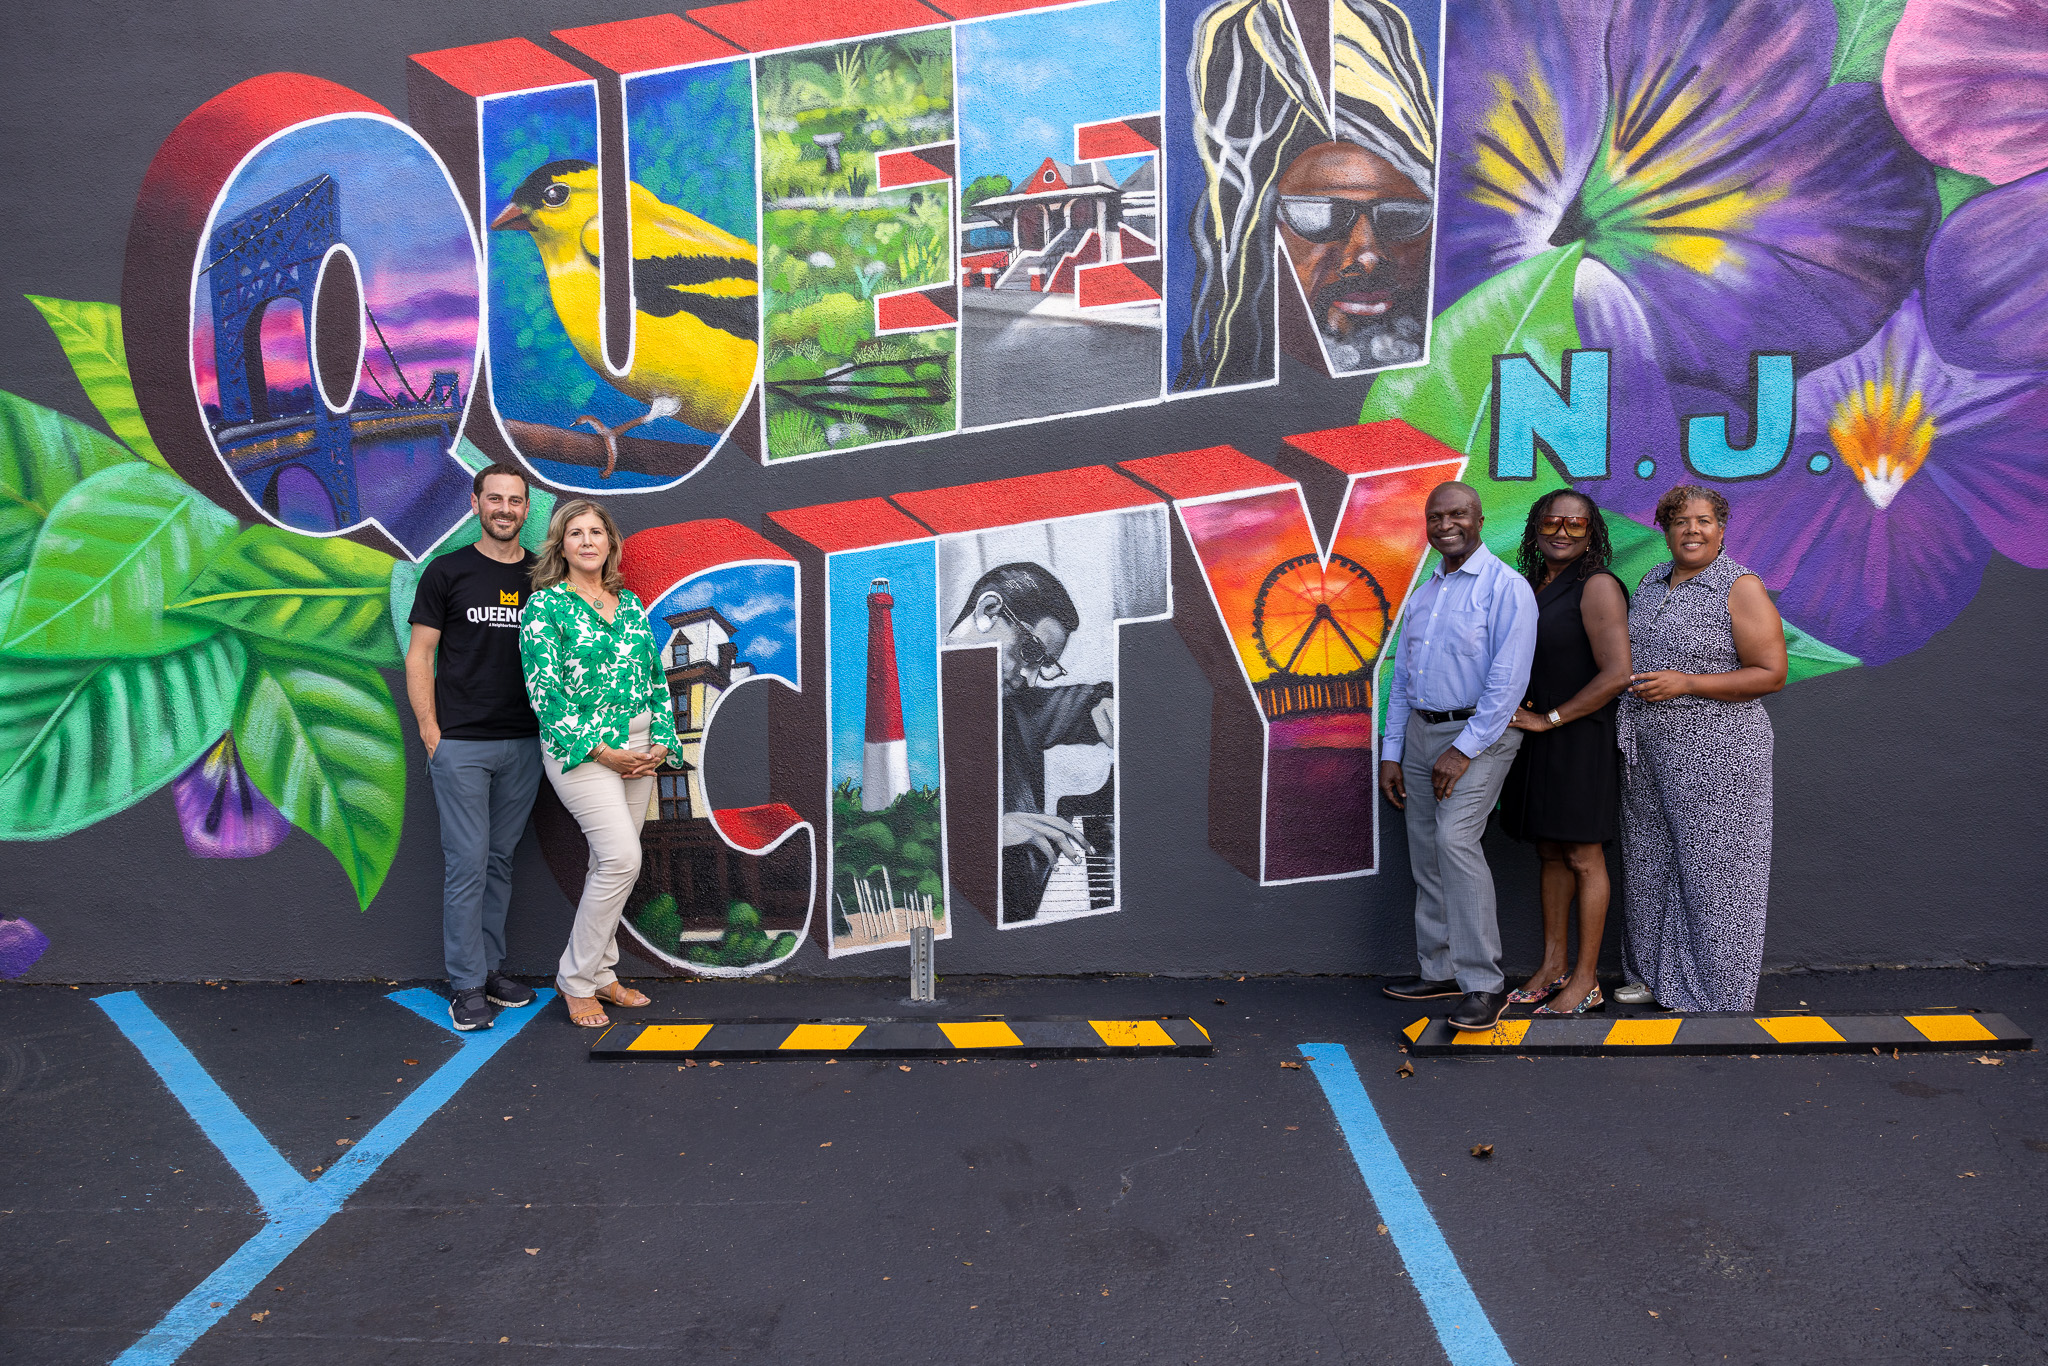 Queen City owner Jennifer Brandt and team member Justin Singer pose with city of Plainfield officials in front of the Queen City mural outside the dispensary.